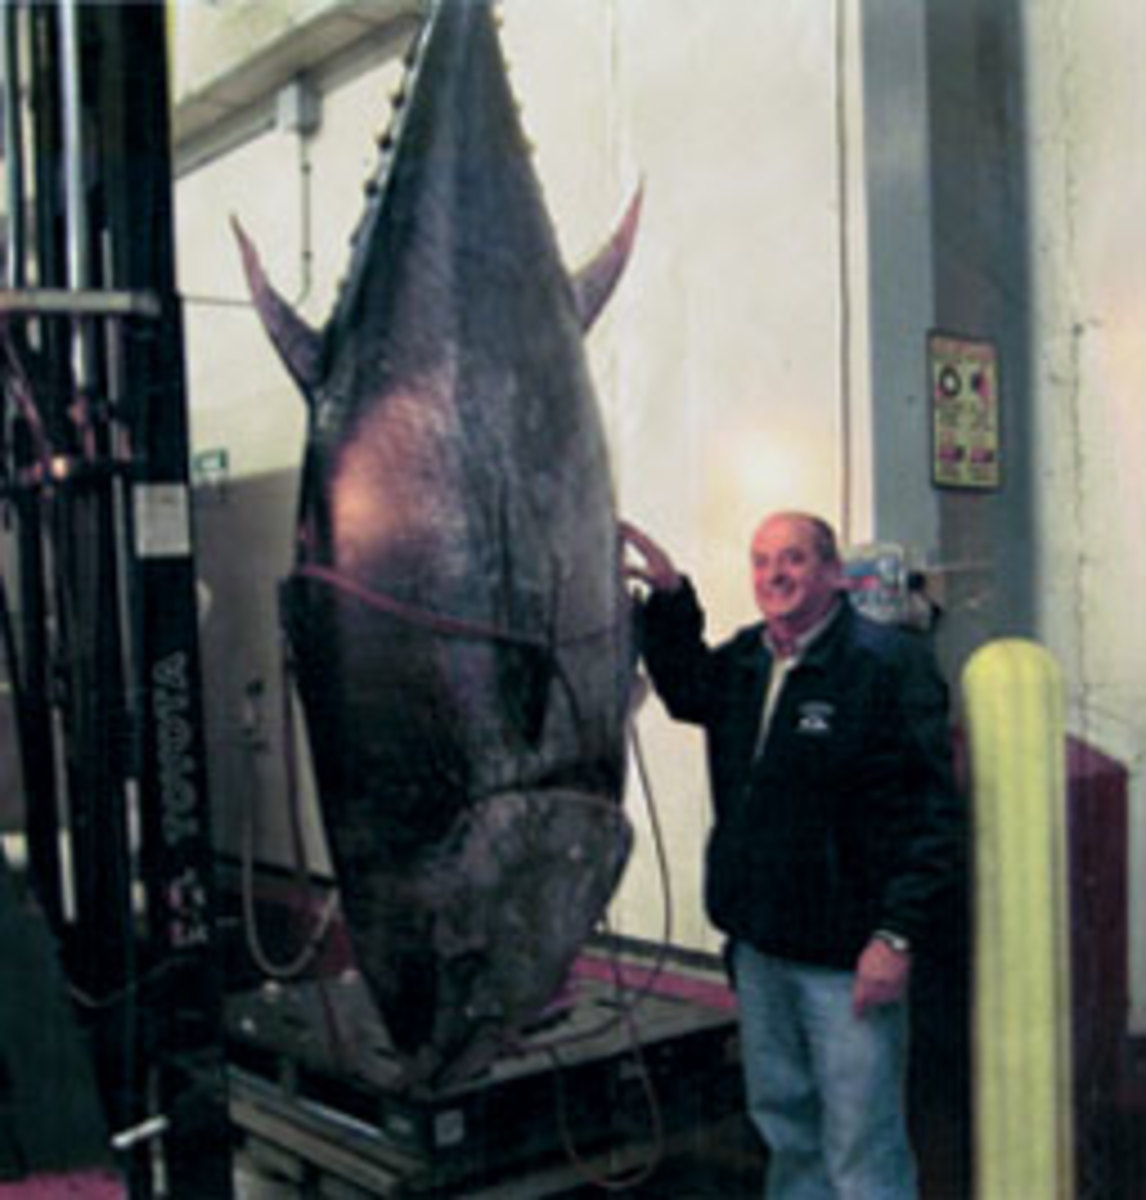 Carlos Rafael lost a big payout when the 881-pound tuna was deemed an illegal catch.